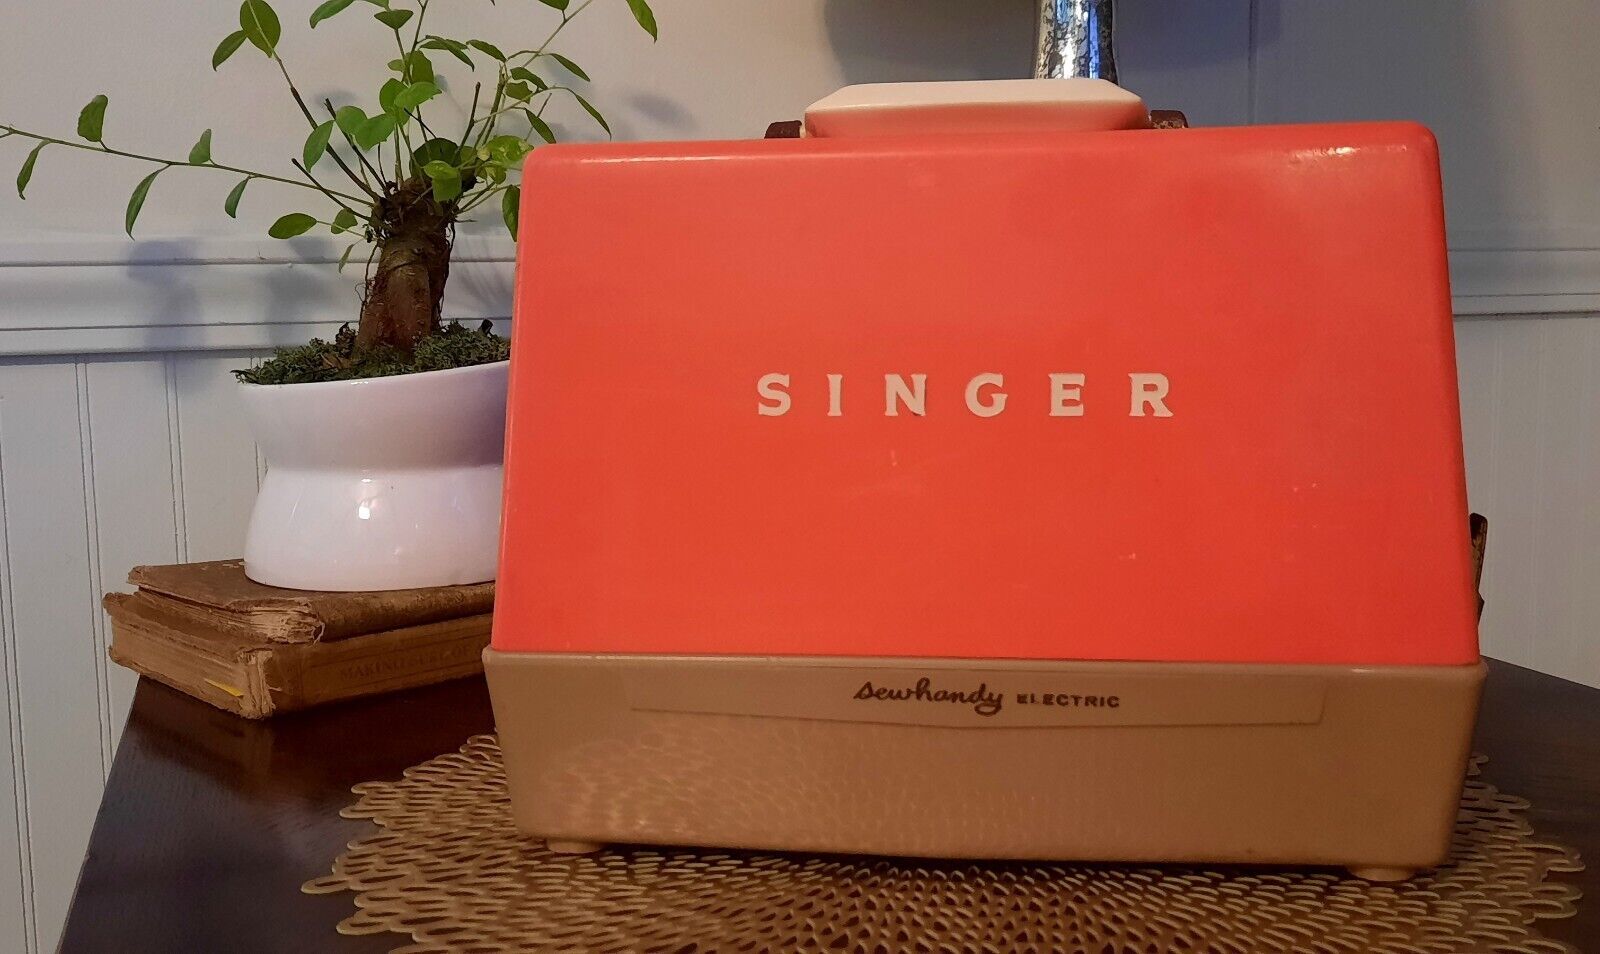 Singer Kids Sewing Machine, Battery Operated-Chainstich, Art Projects